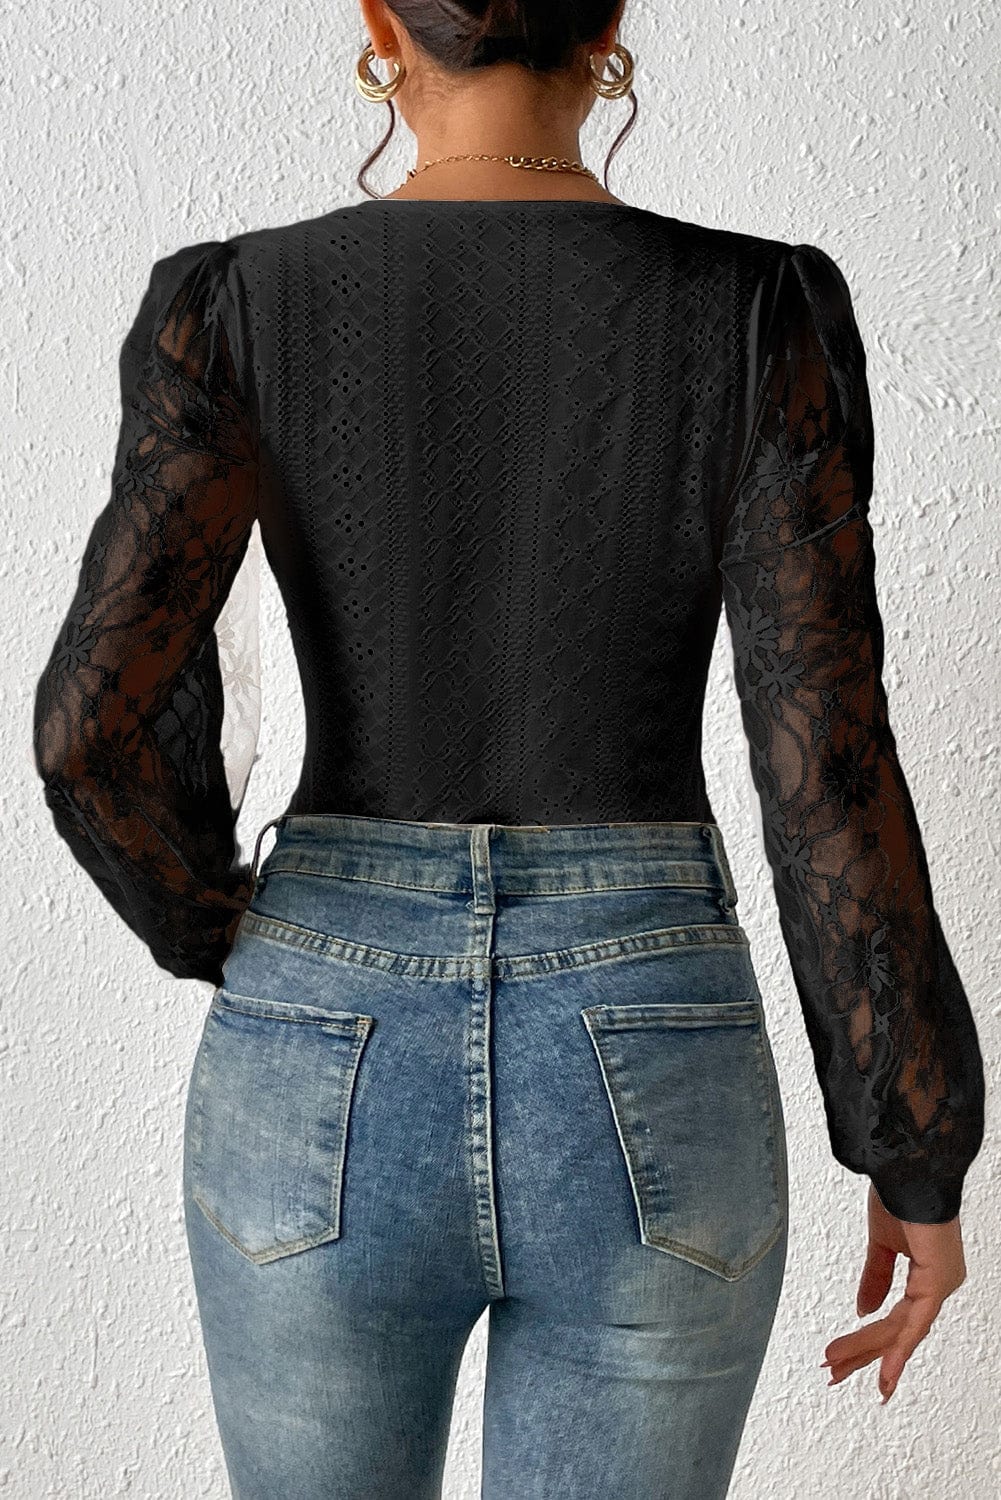 The802Gypsy  Tops Traveling Gypsy Frenchy Contrast Lace Bishop Sleeve Bodysuit